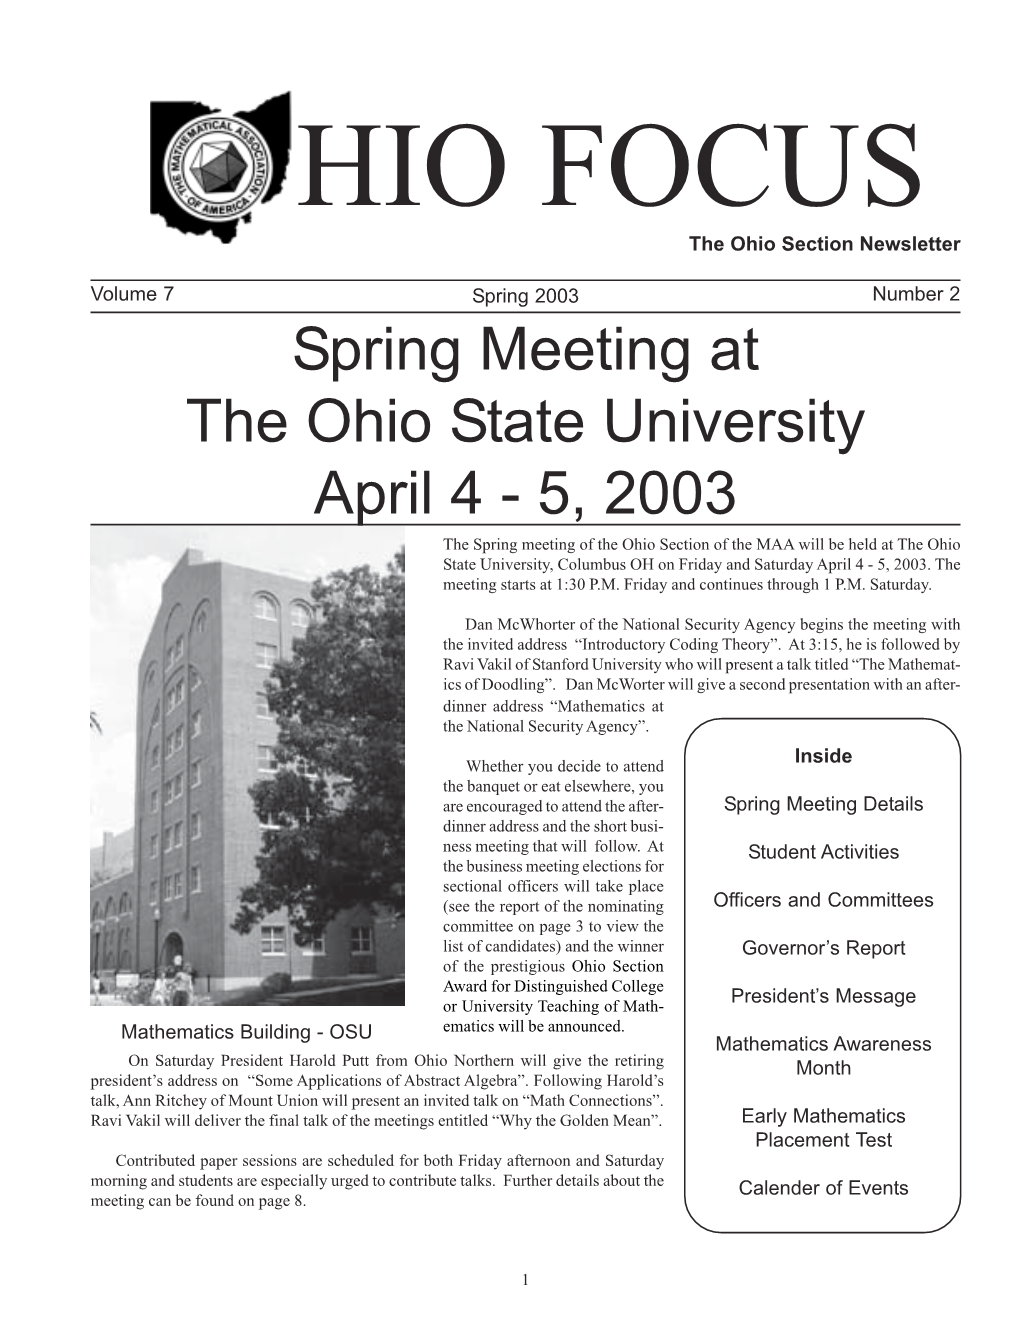 Spring Meeting at the Ohio State University April 4